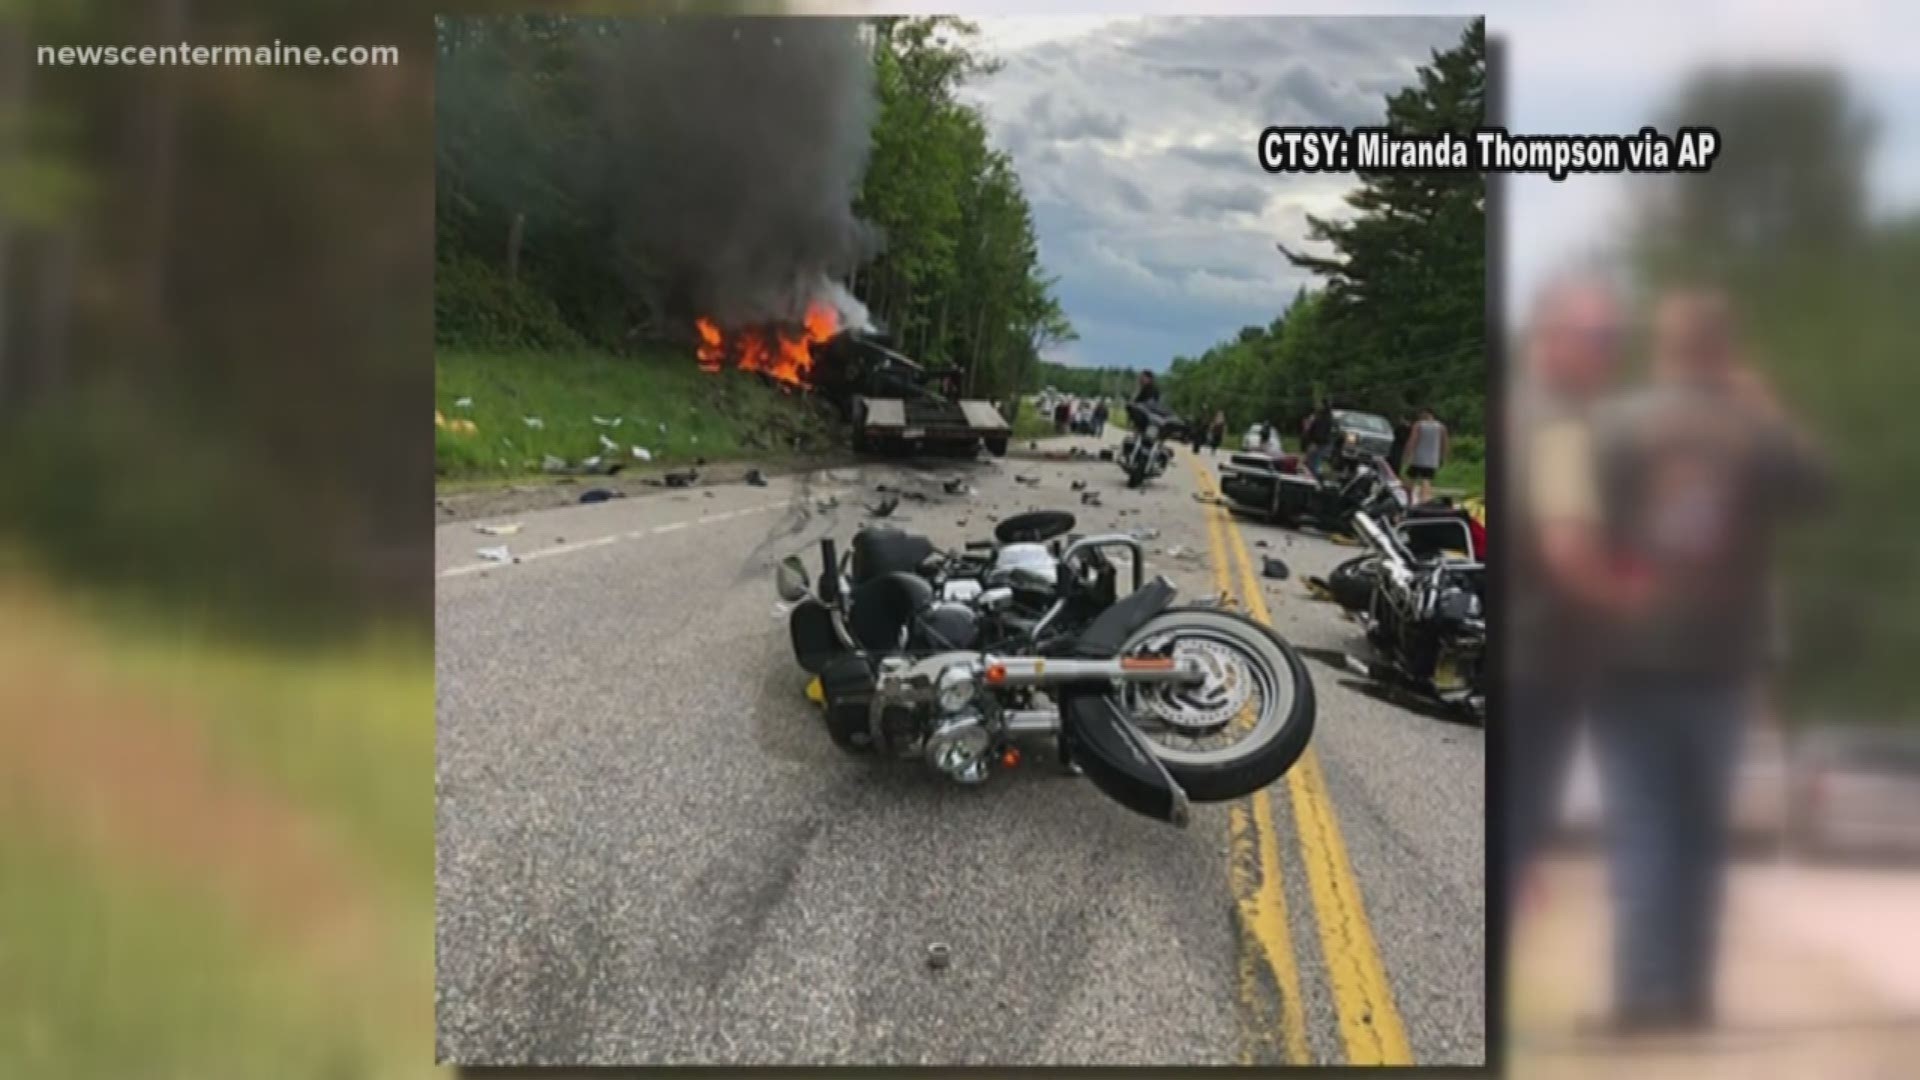 Officials have identified the seven victims of the horrible motorcycle crash in Randolph, New Hampshire. Friday evening’s crash involved a pick-up truck hauling a trailer that collided with a group of 10 bikers on a remote highway in northern New Hampshire.